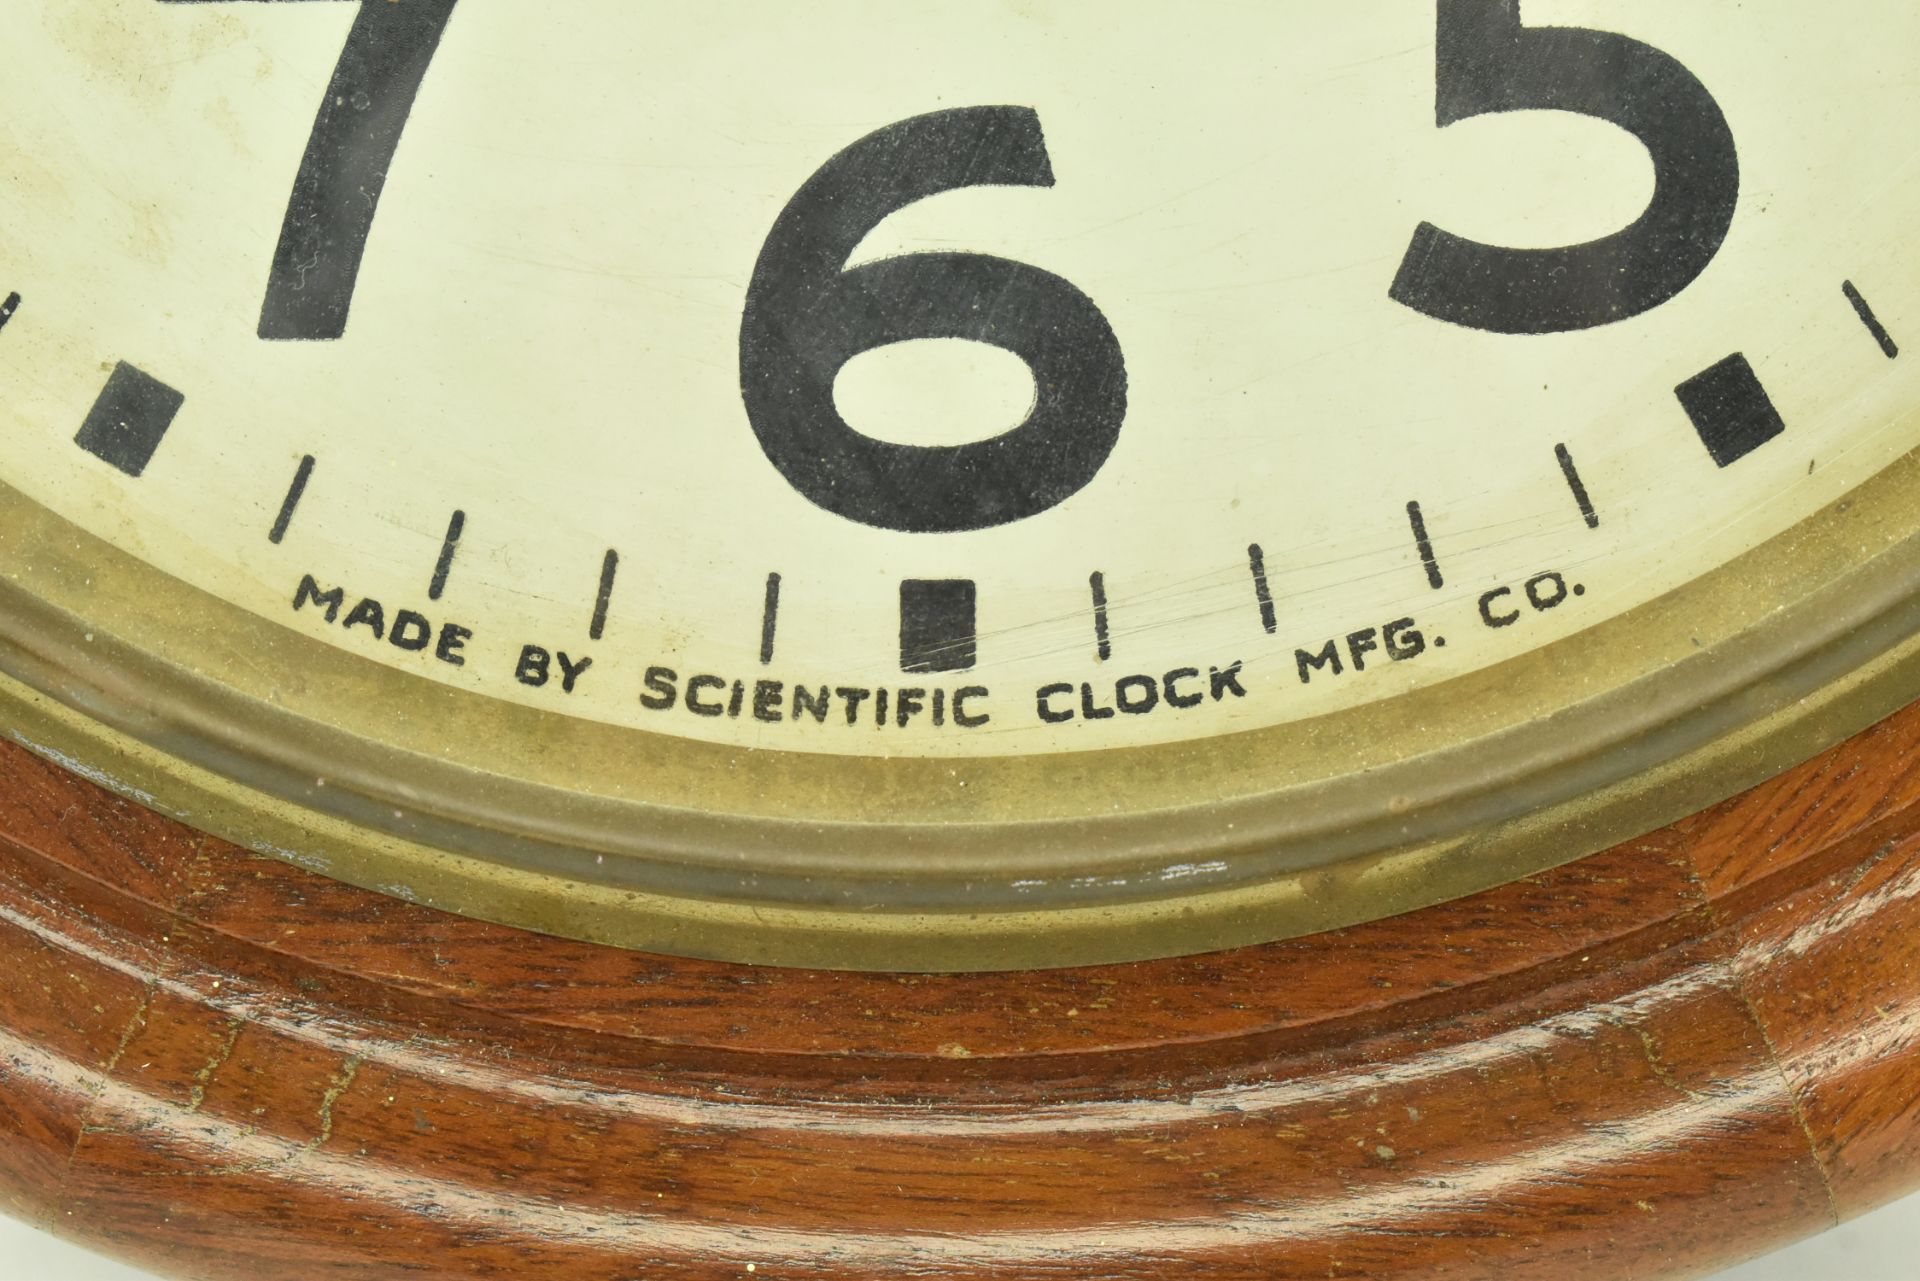 SCIENTIFIC CLOCK MANUFACTURING COMPANY - 1920S STATION CLOCK - Image 2 of 5